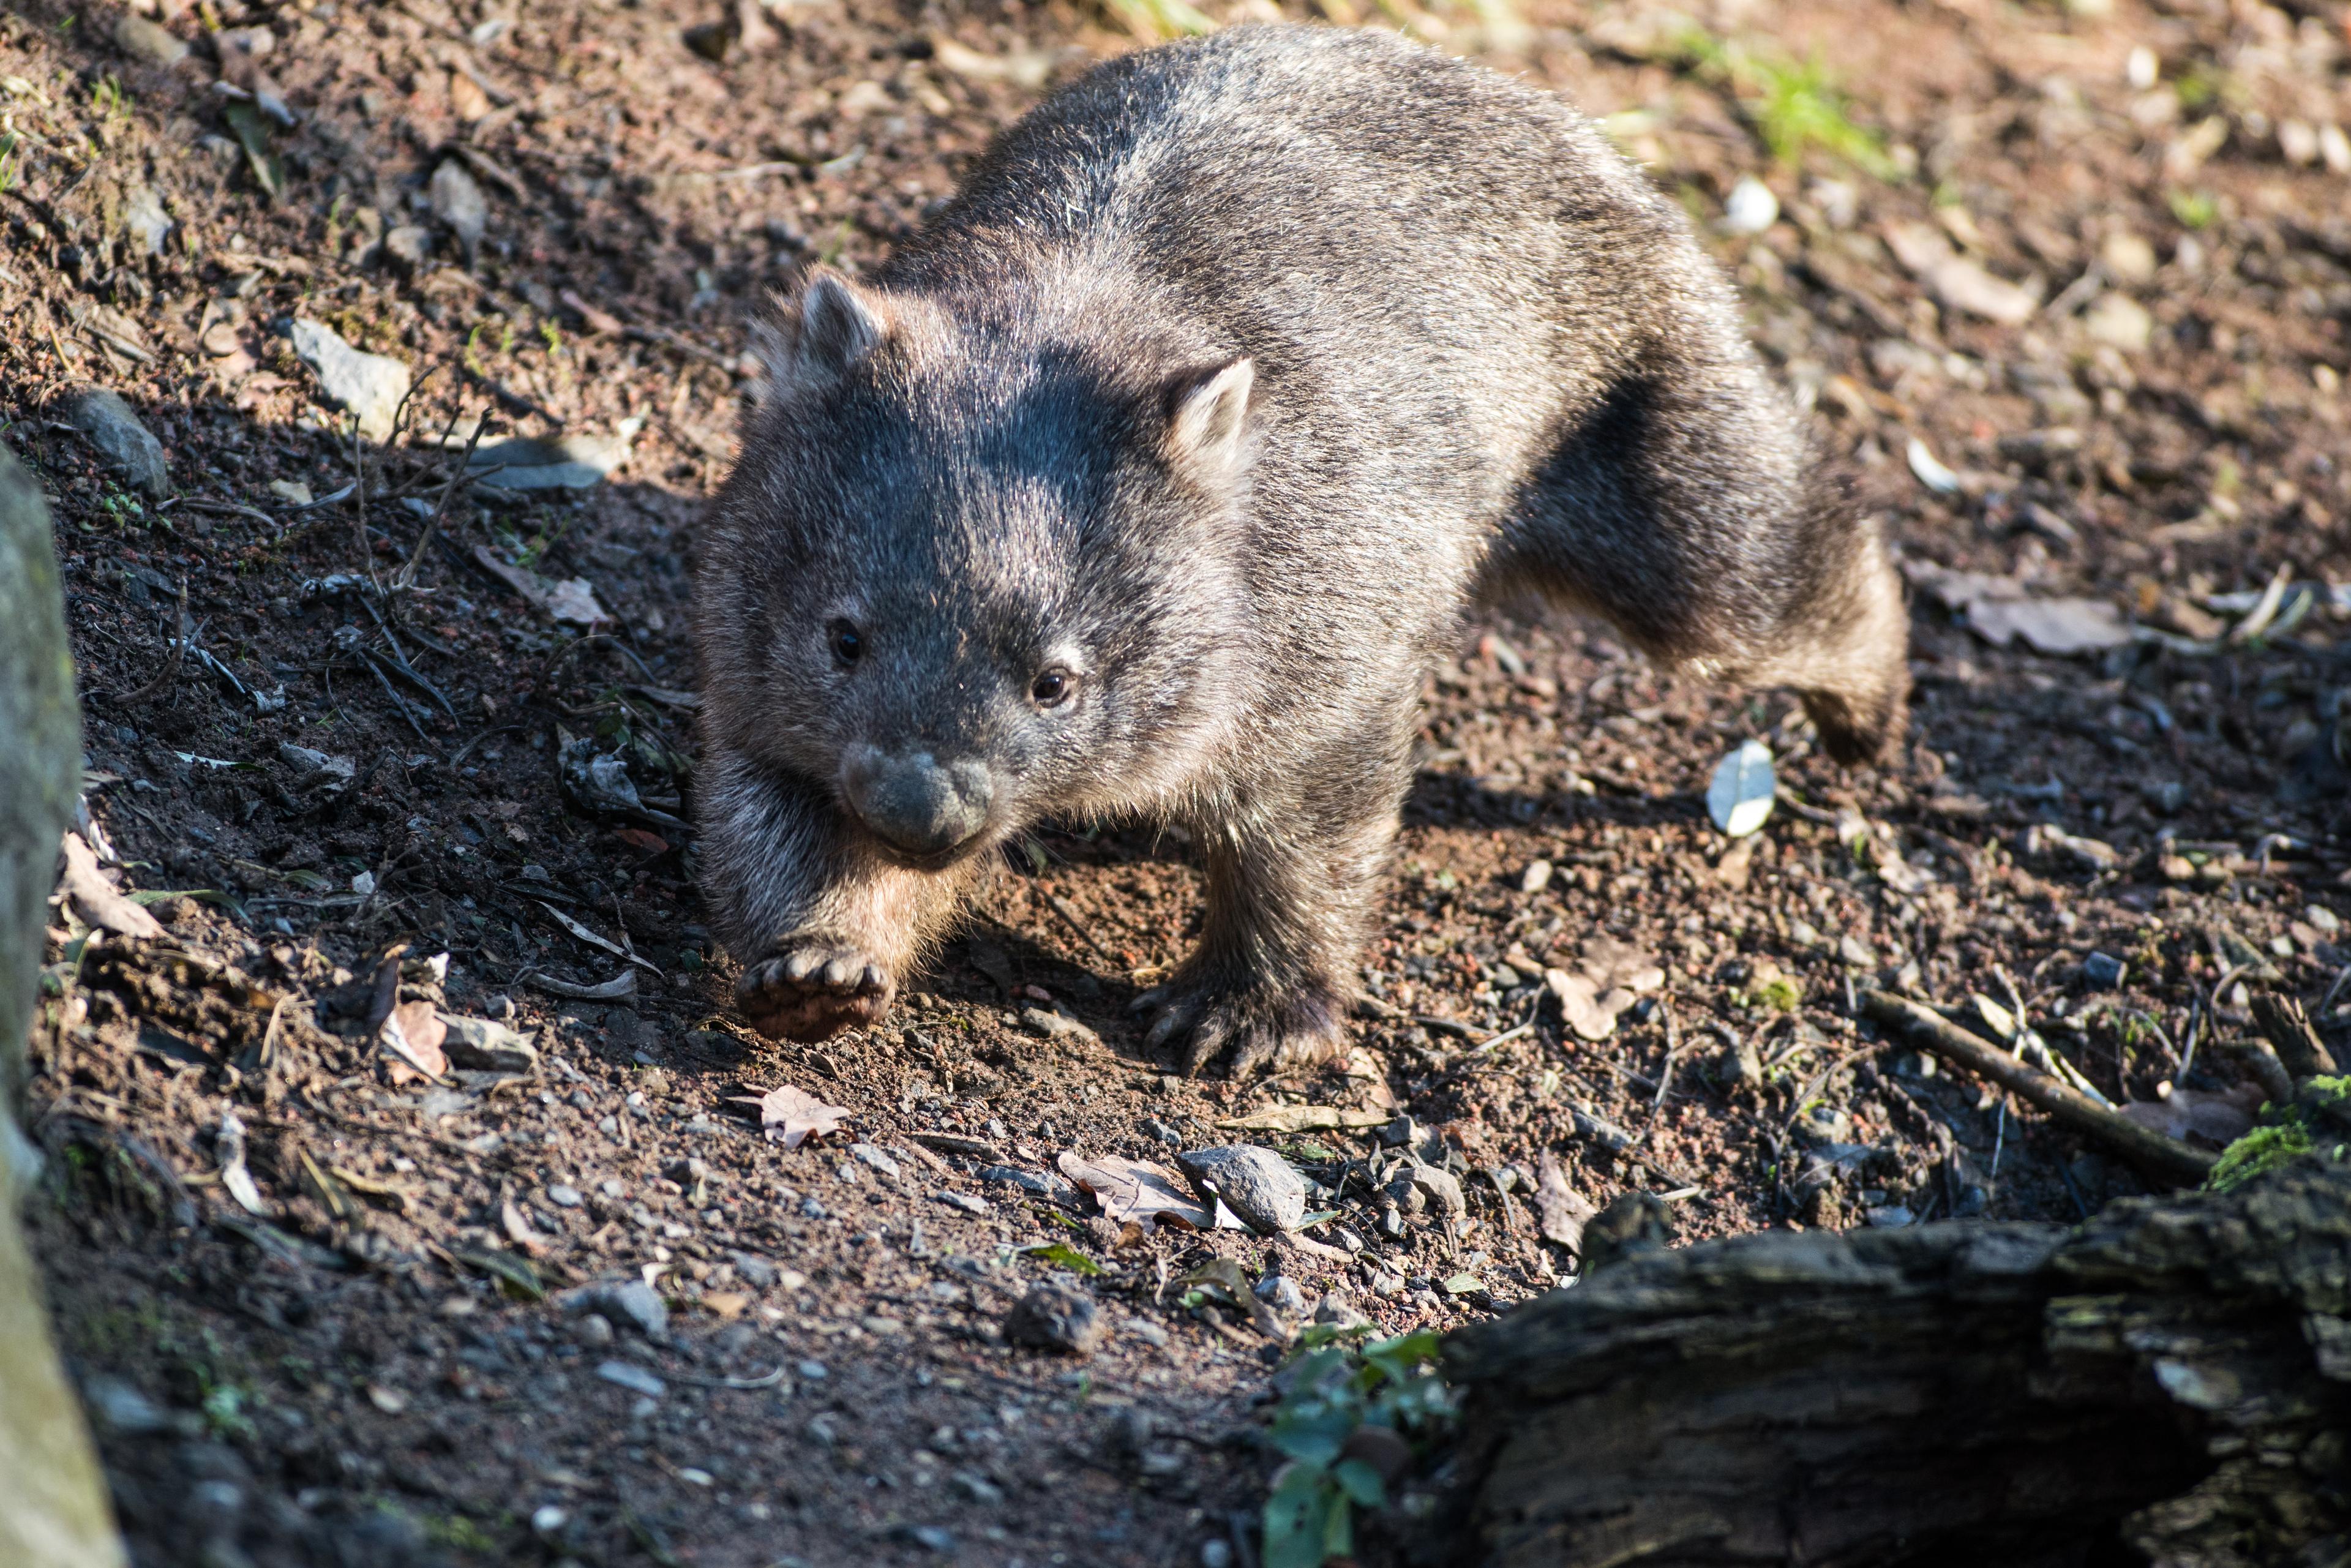 Wombat in der Themenwelt Outback im Erlebnis- Zoo Hannover